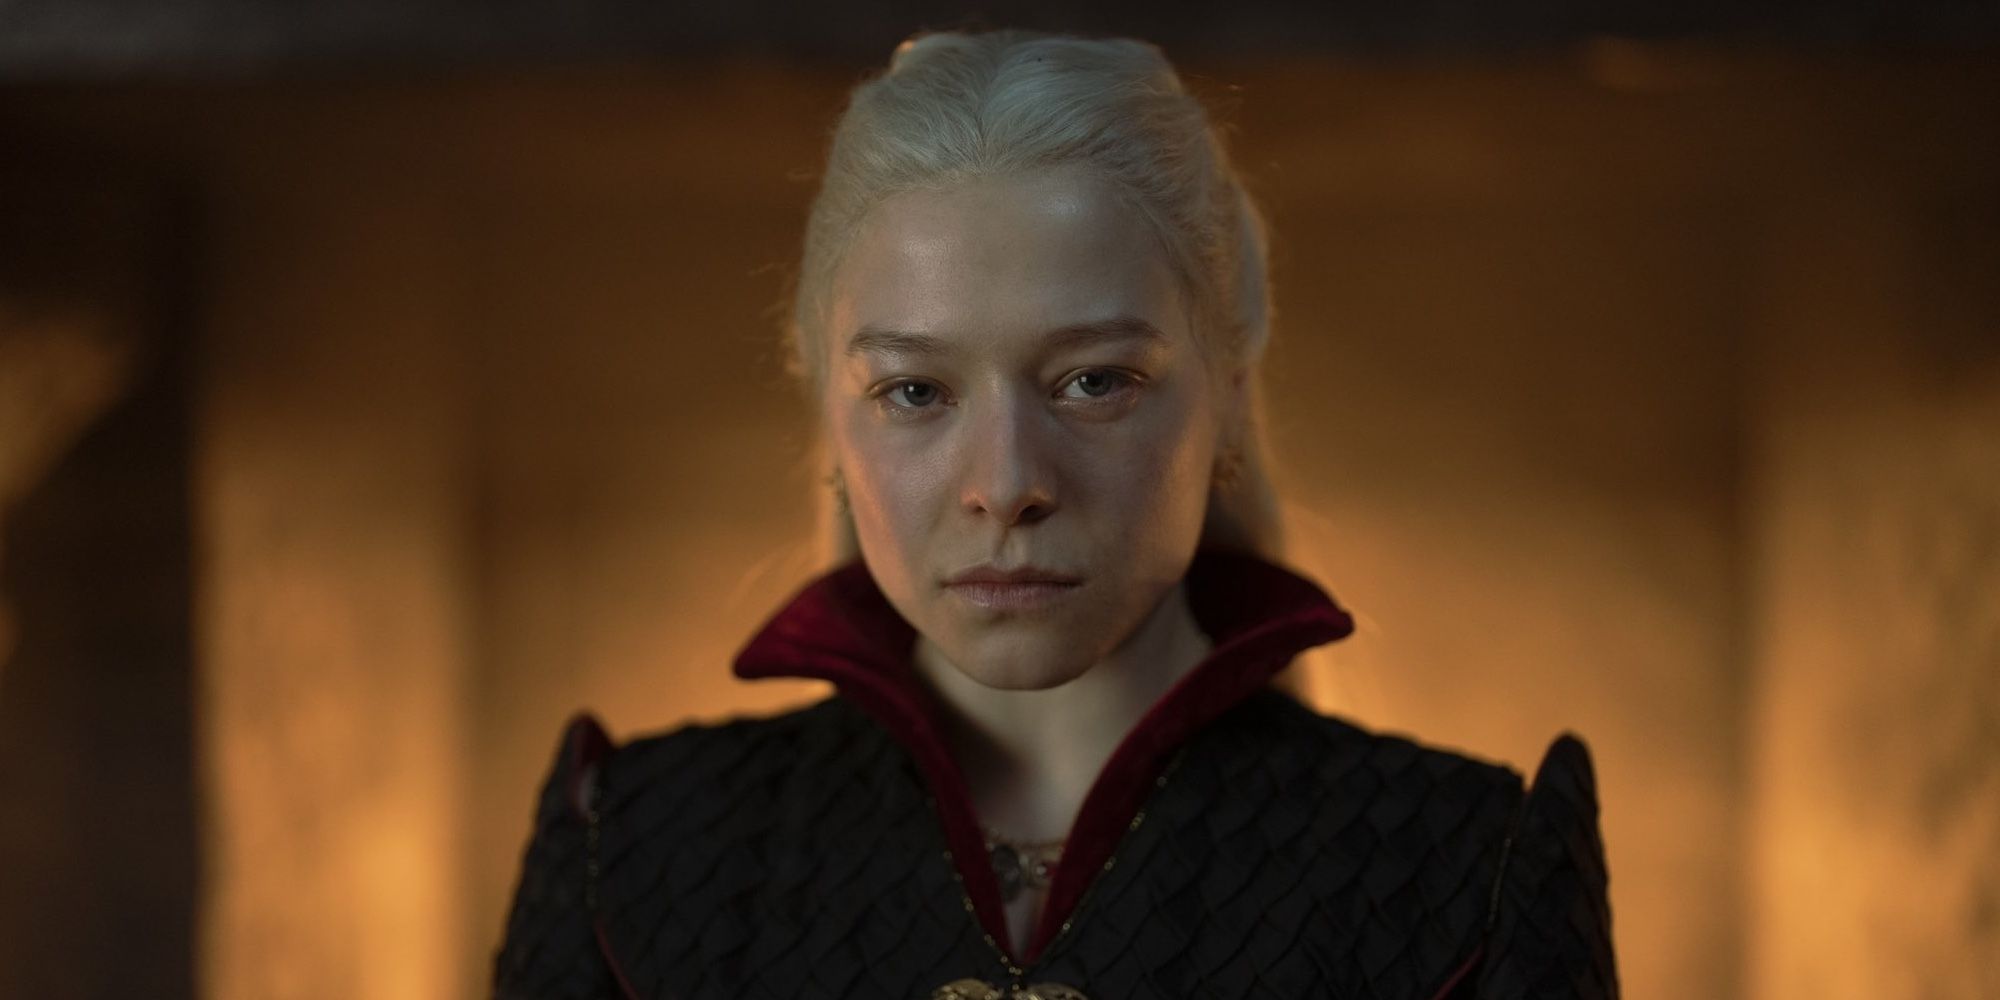 Rhaenyra's steely expression at the end of the season 1 finale